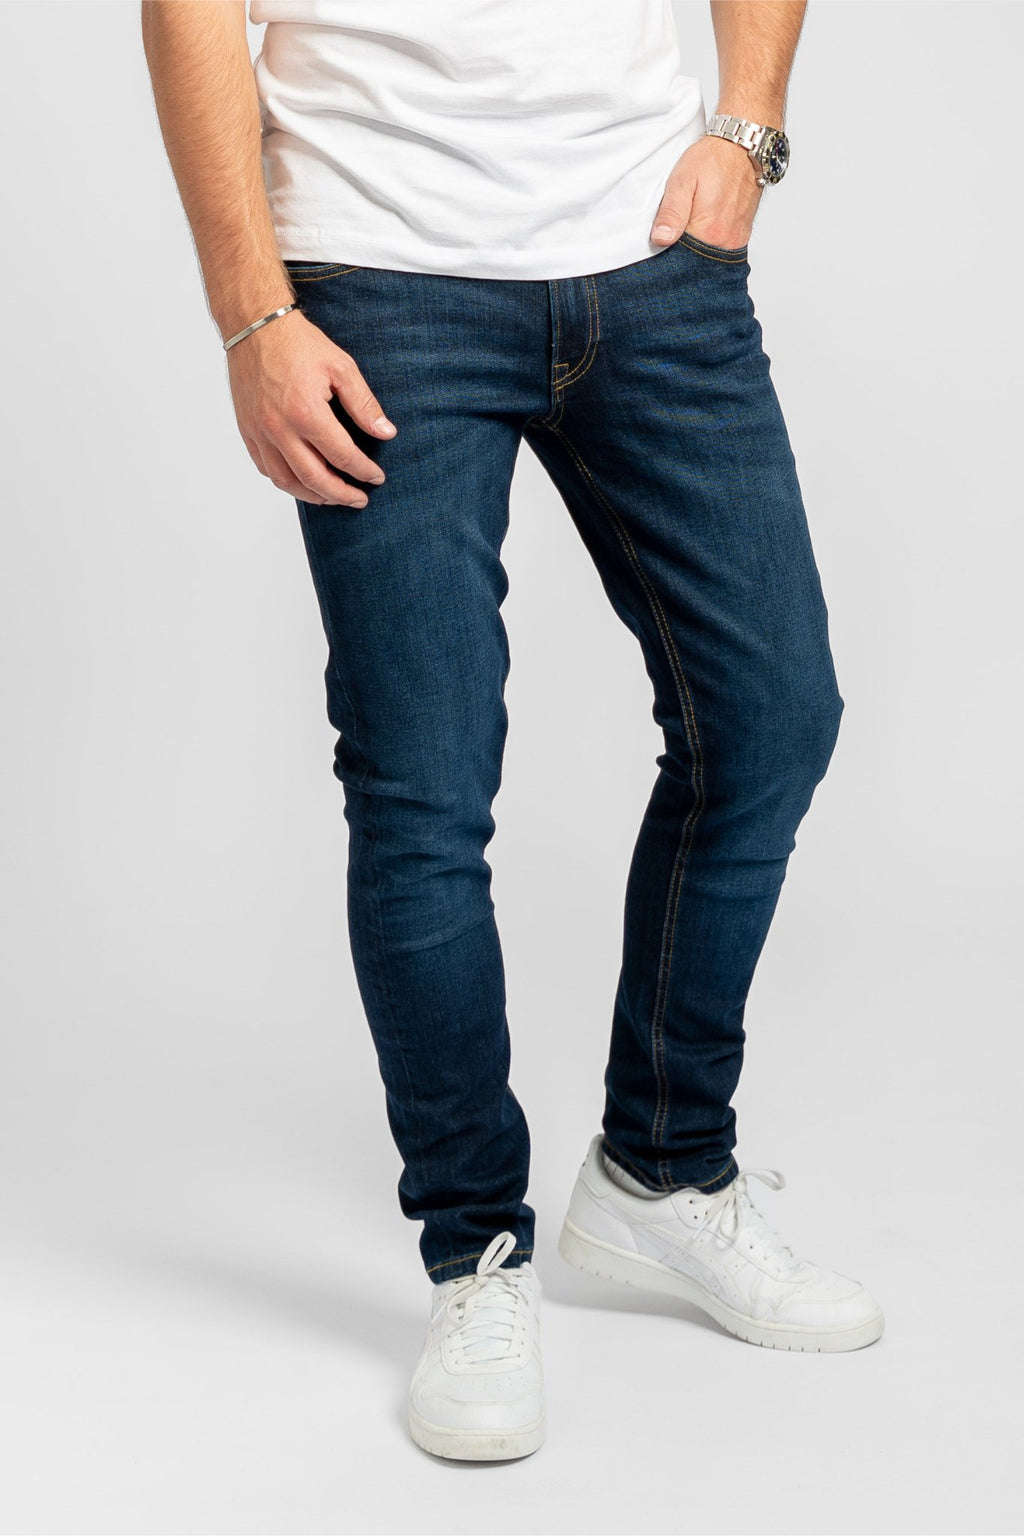 The Original Performance Jeans ™ ♠ - Package Deal (2 τεμ.)